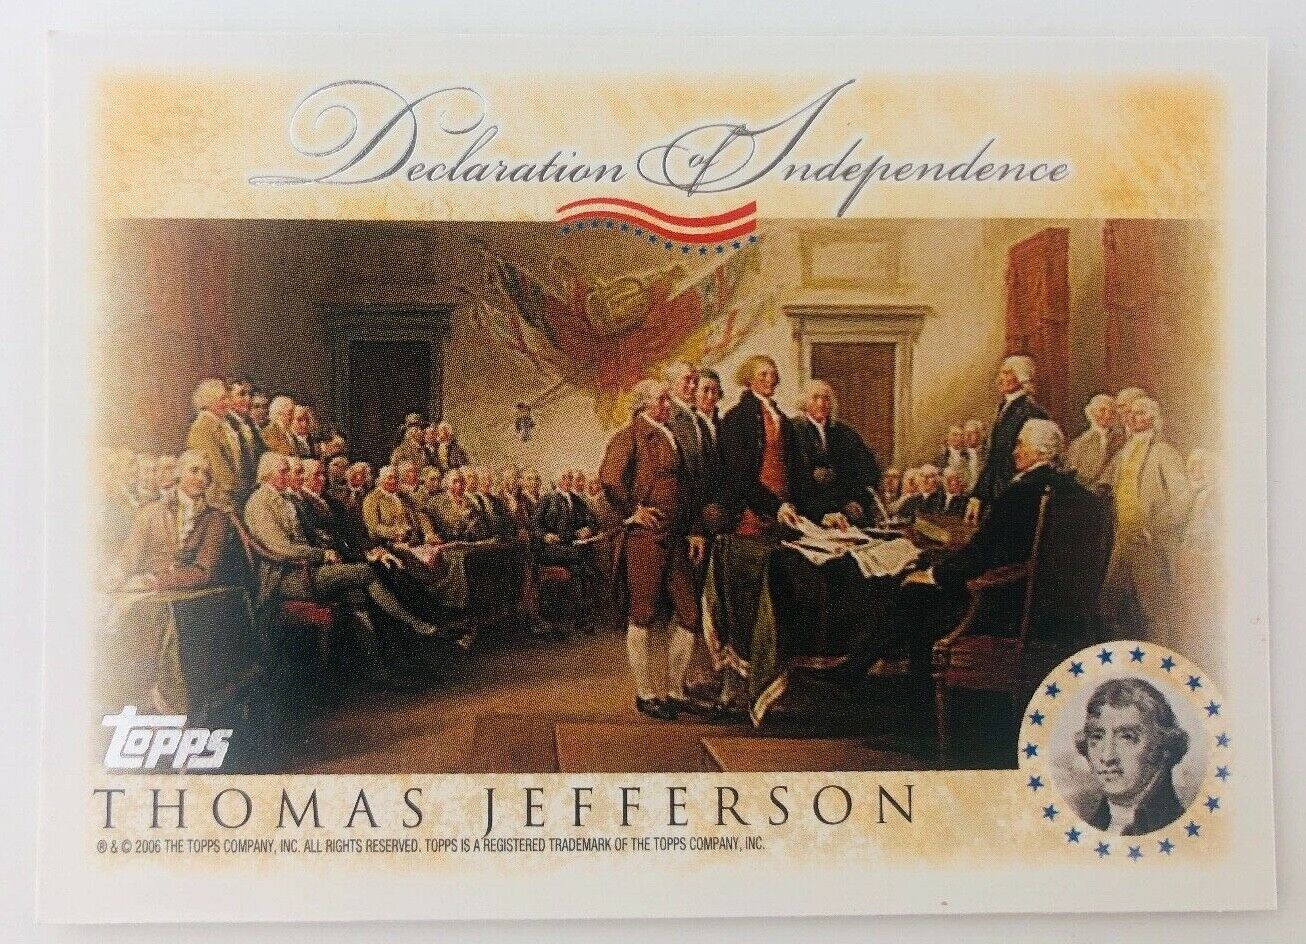 2006 Topps Declaration of Independence Thomas Jefferson Card